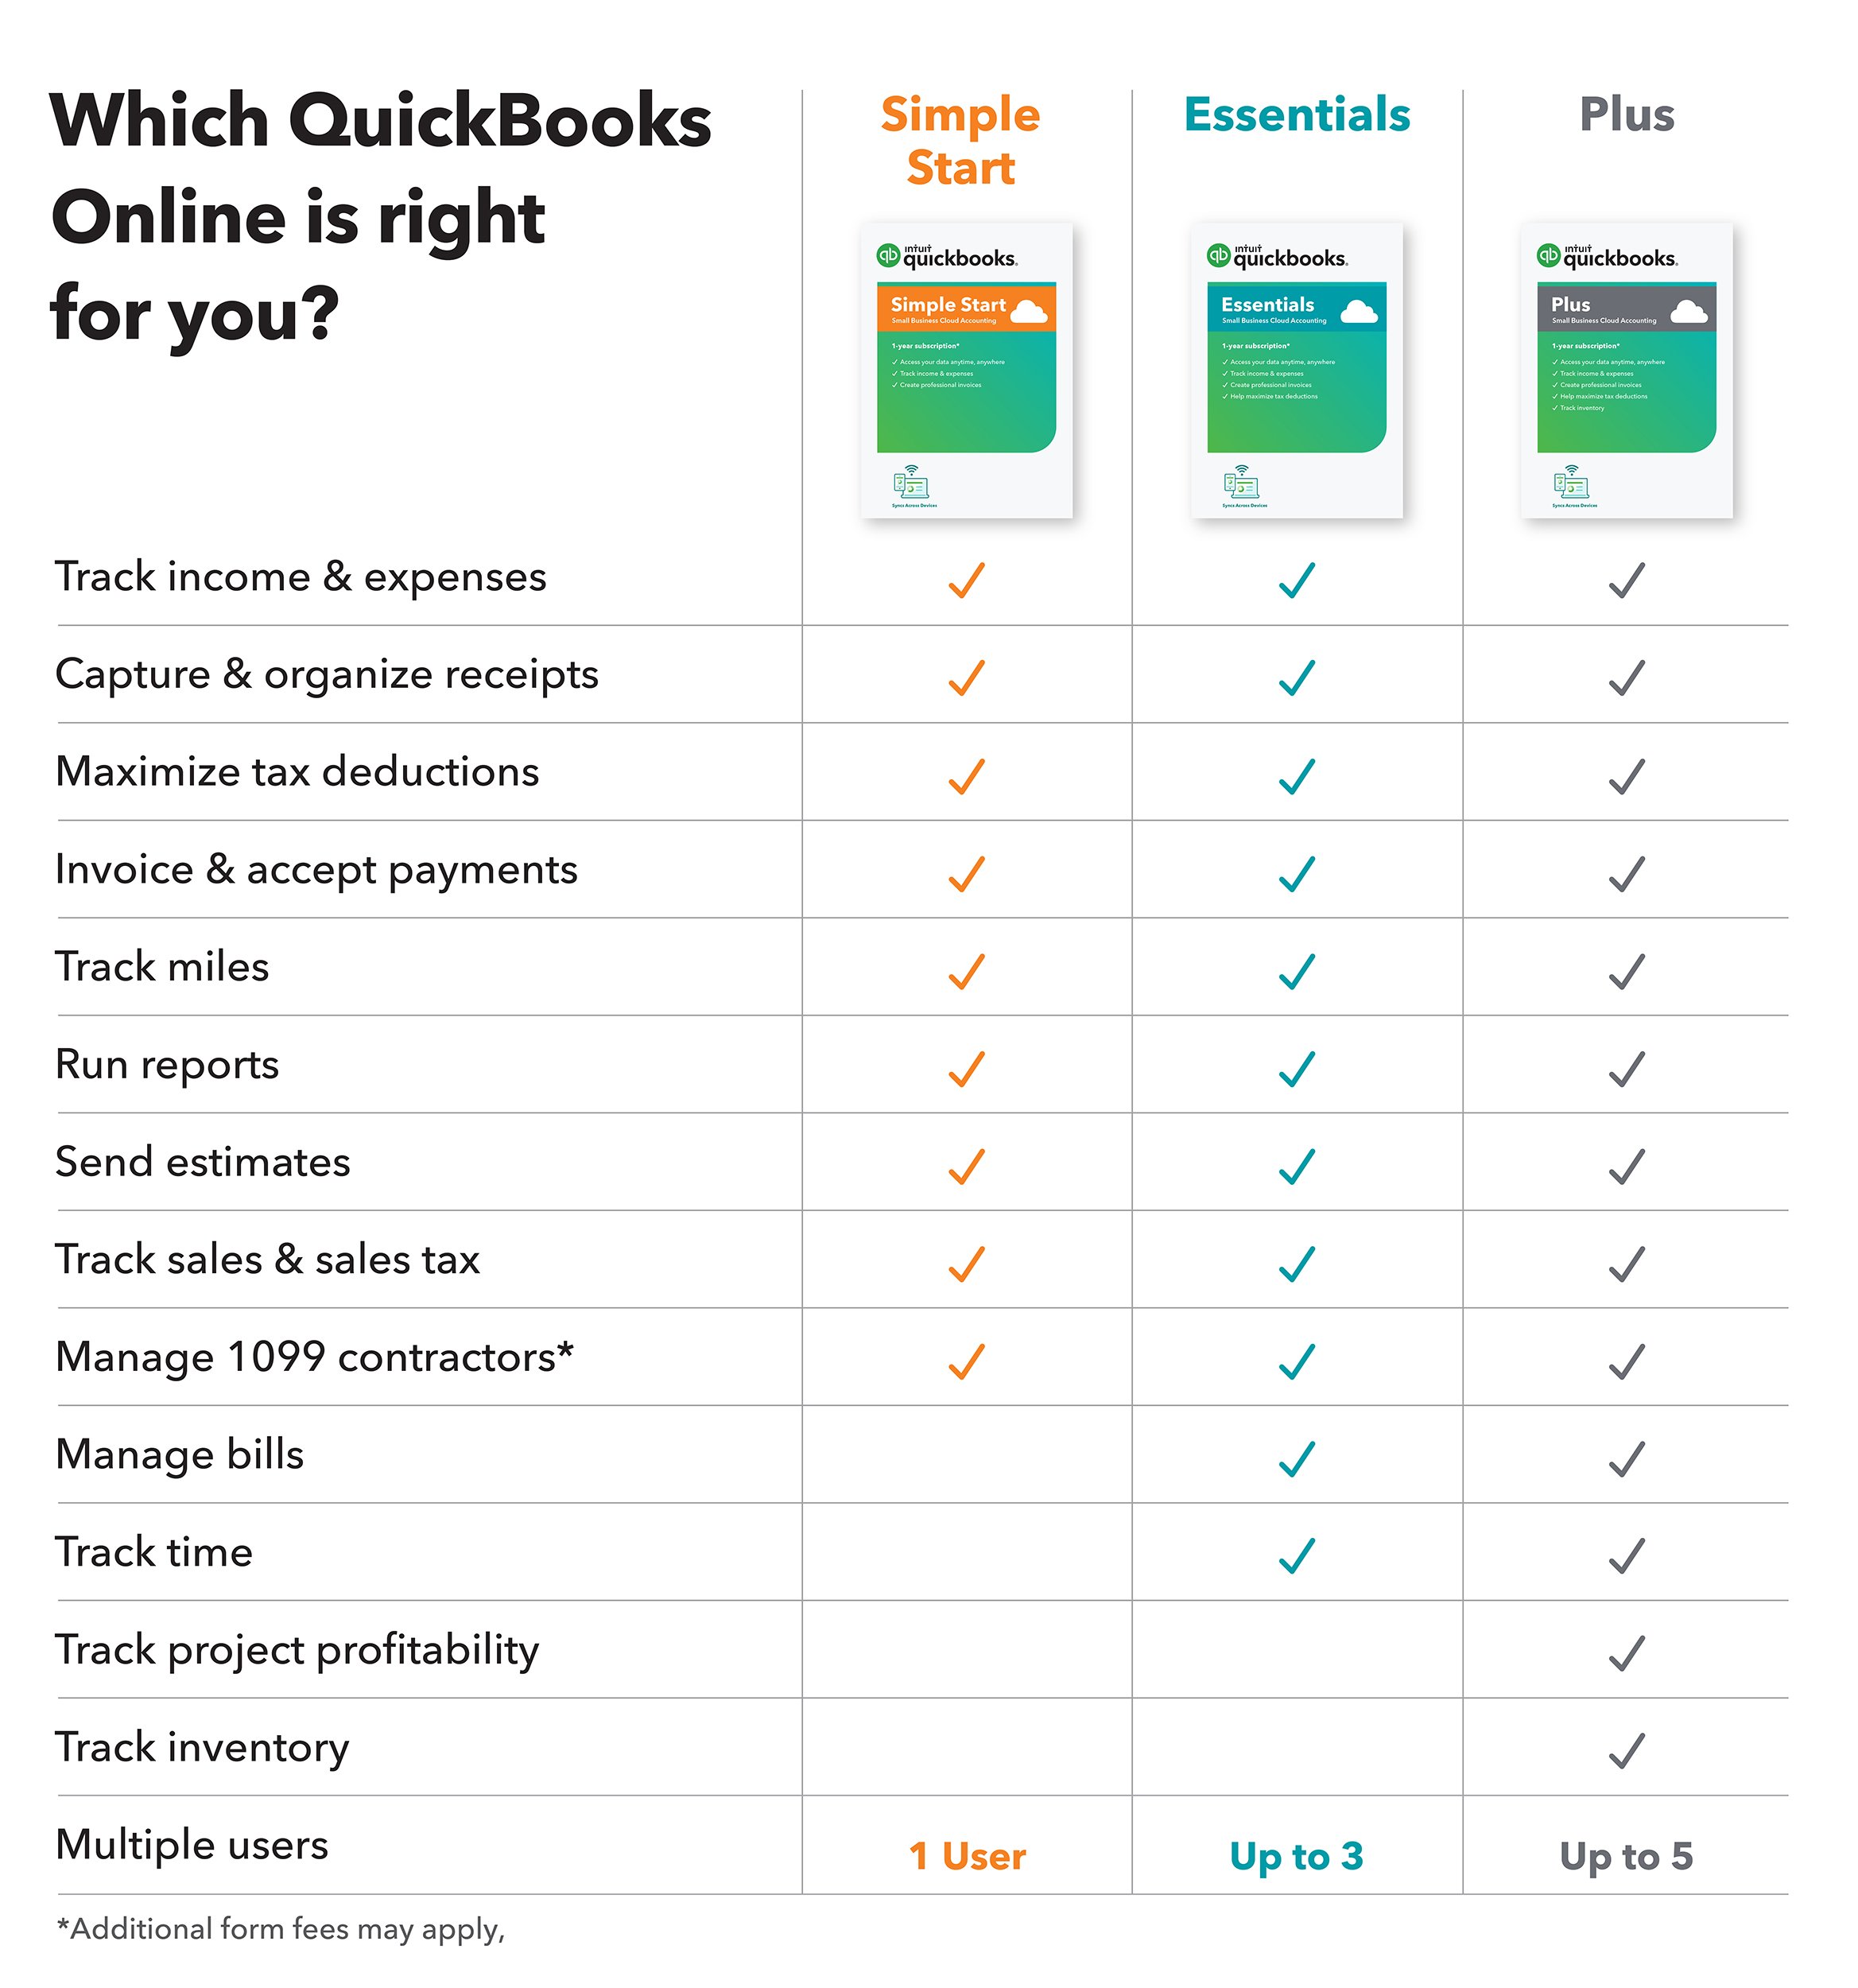 which-is-right-for-you-quickbooks-online-vs-quickbooks-desktop